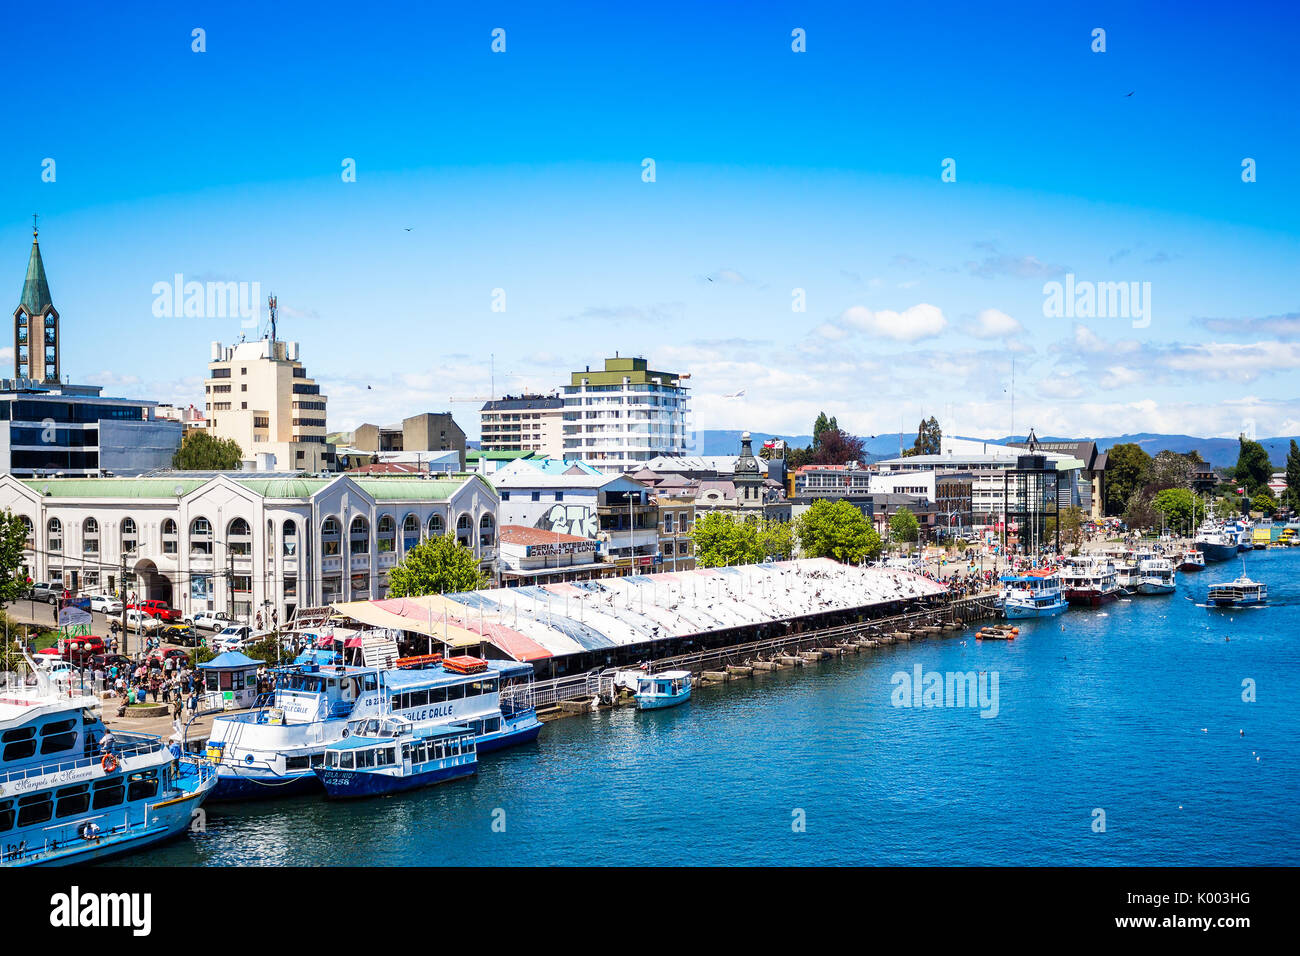 VALDIVIA, CHILE - OCTOBER 30, 2016: View of the fish market in Valdivia. This is one of the main touristic attraction of the town. Stock Photo